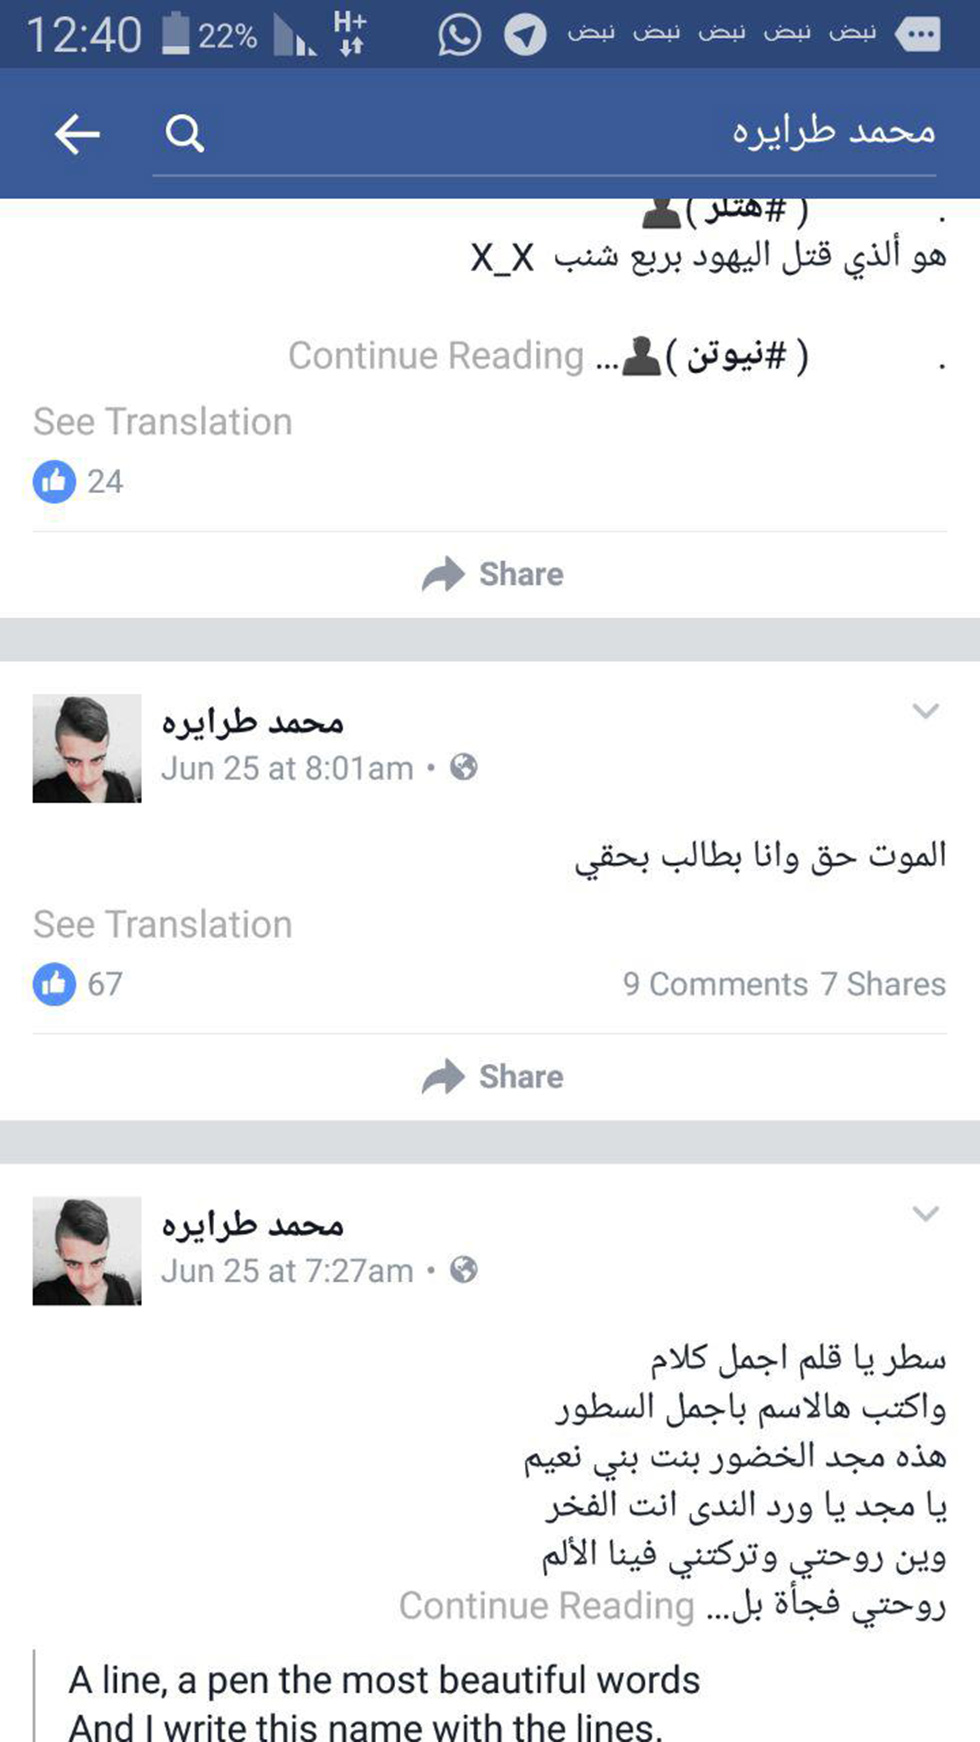 Posts from the terrorist's Facebook page